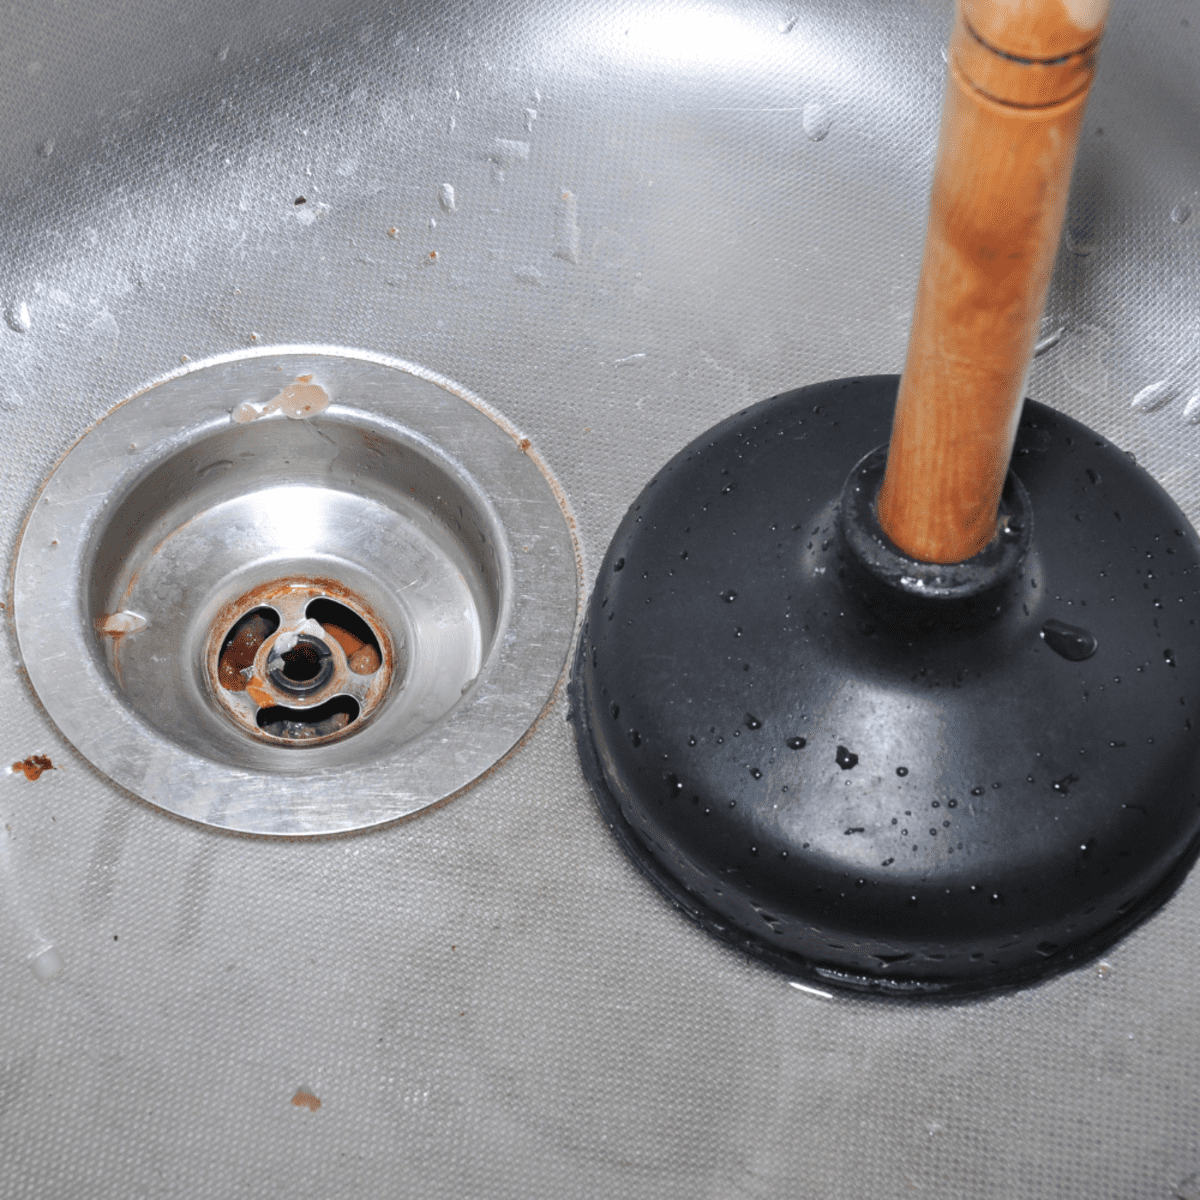 Cleaning hack to unclog the shower drain with cola is 'simple and